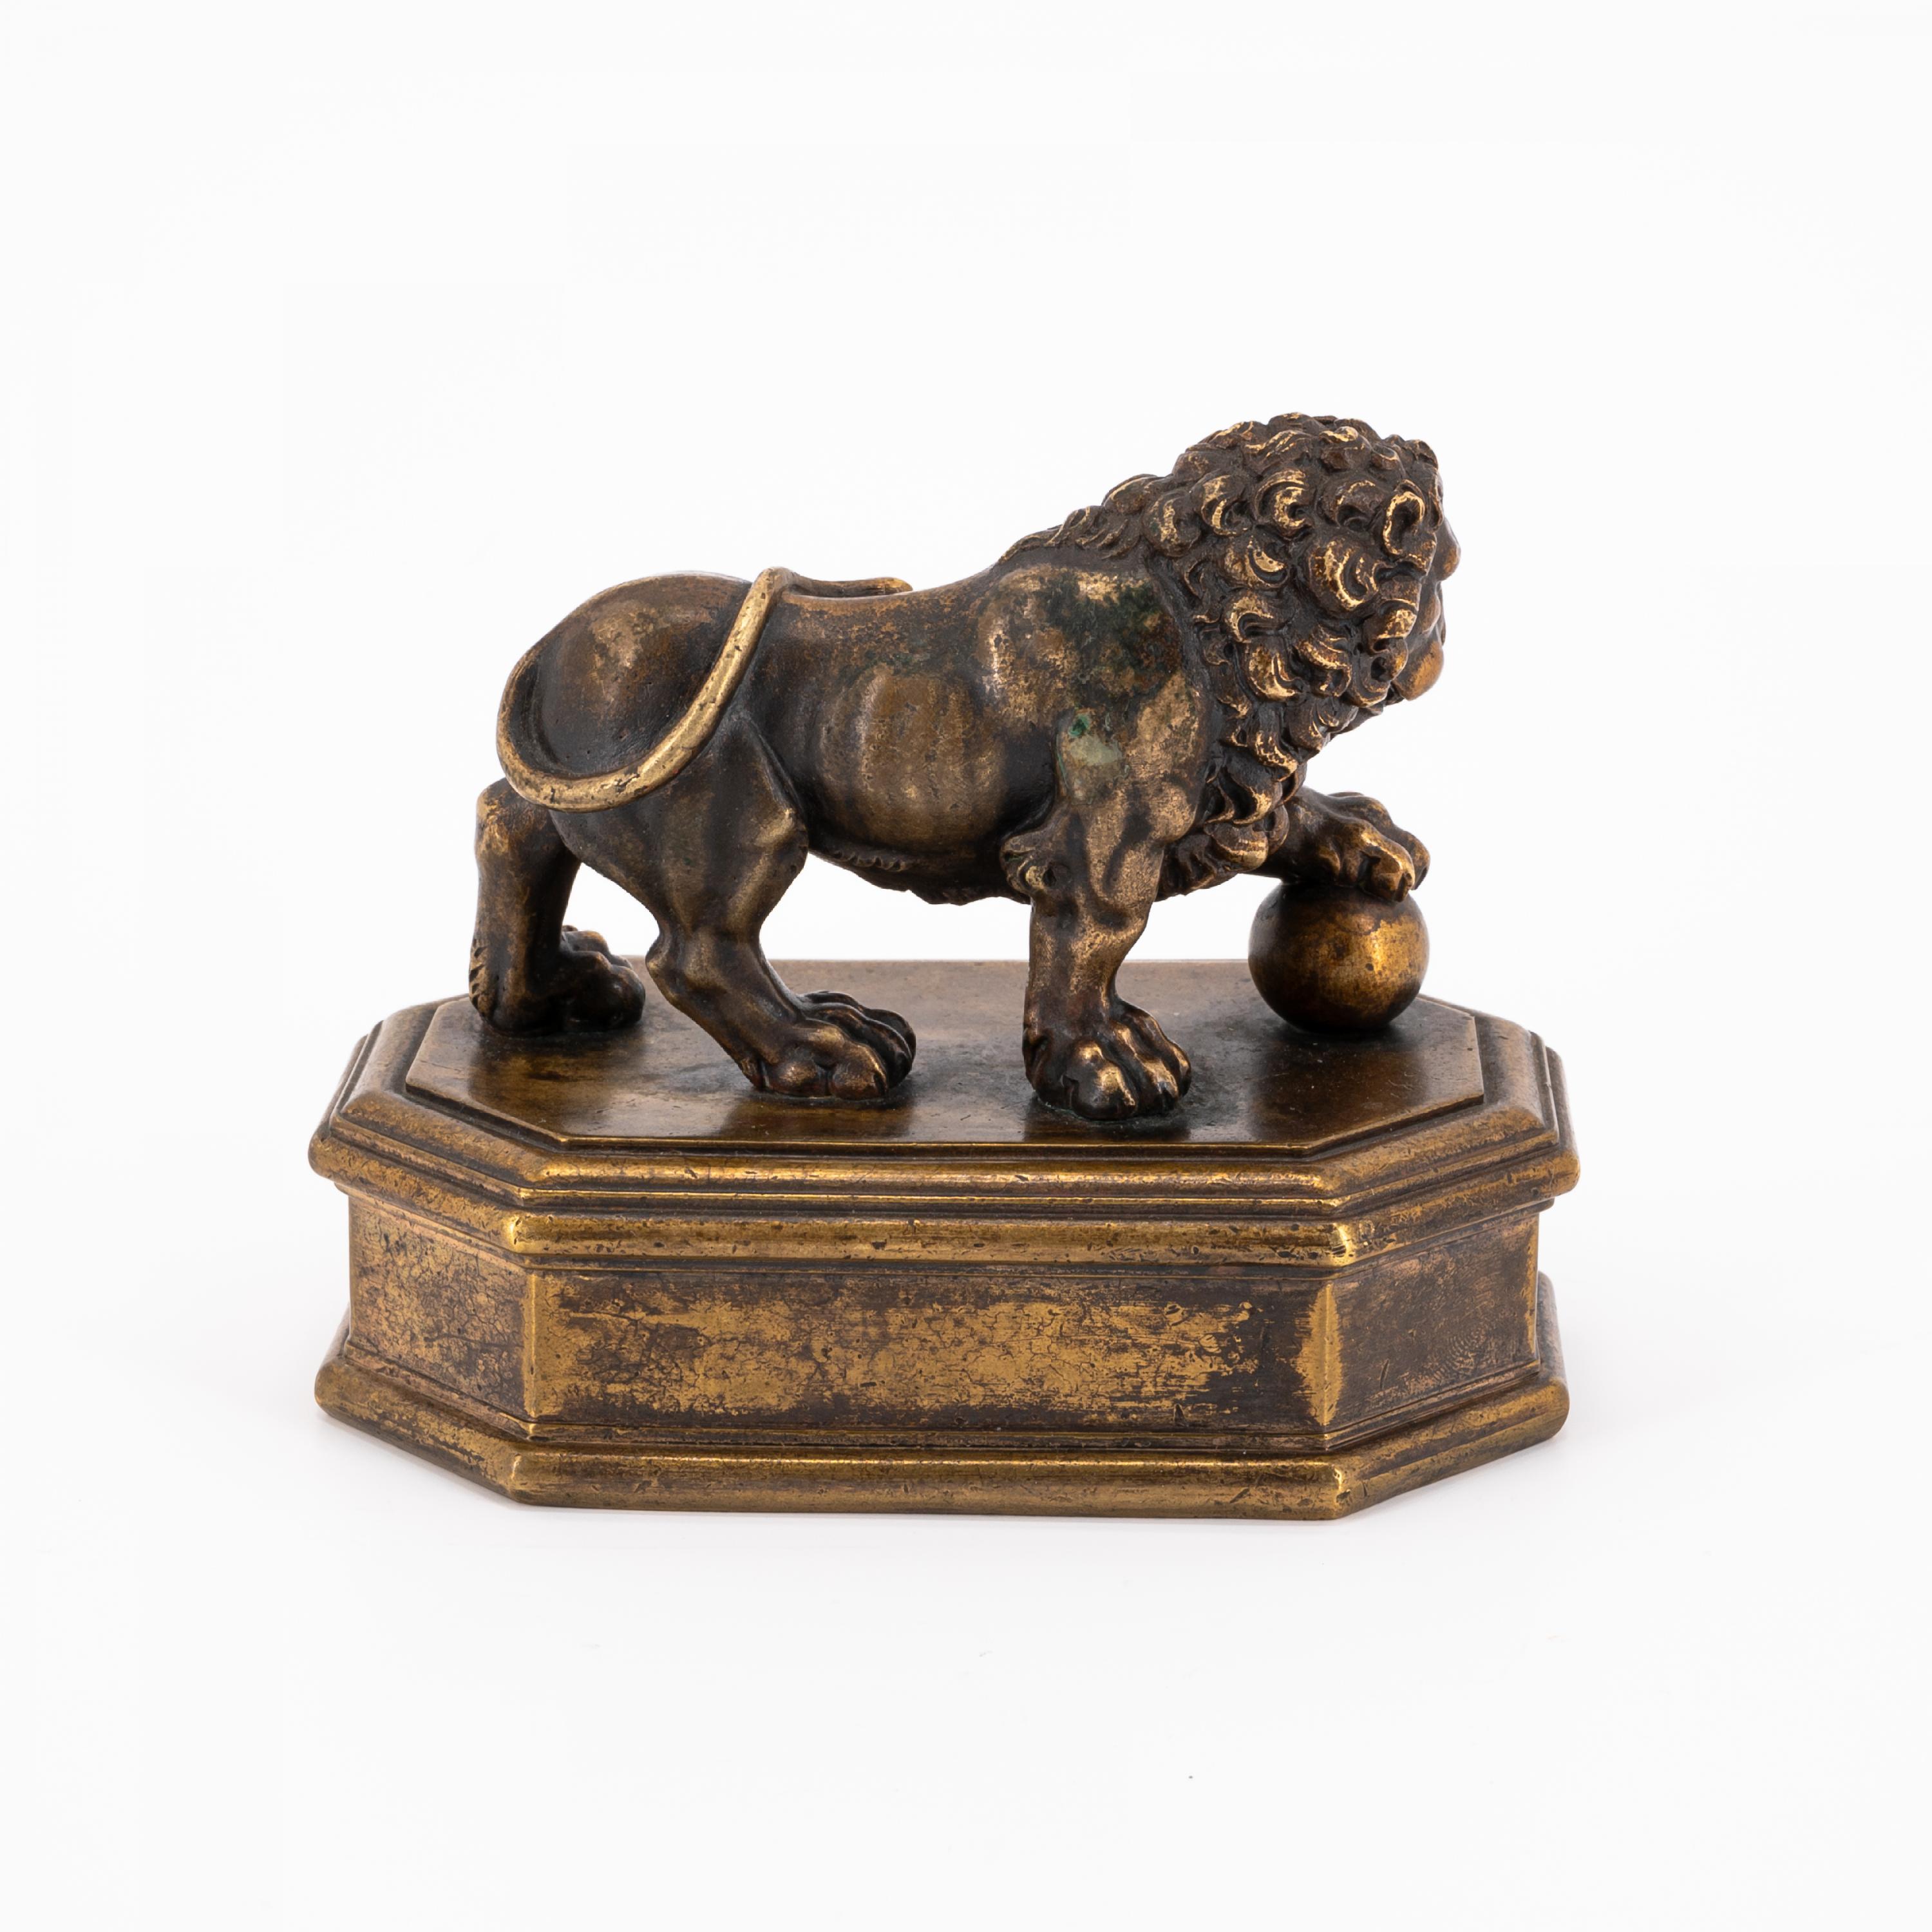 SMALL BRONZE SCULPTURE OF A LION ON A PEDESTAL - Image 4 of 6